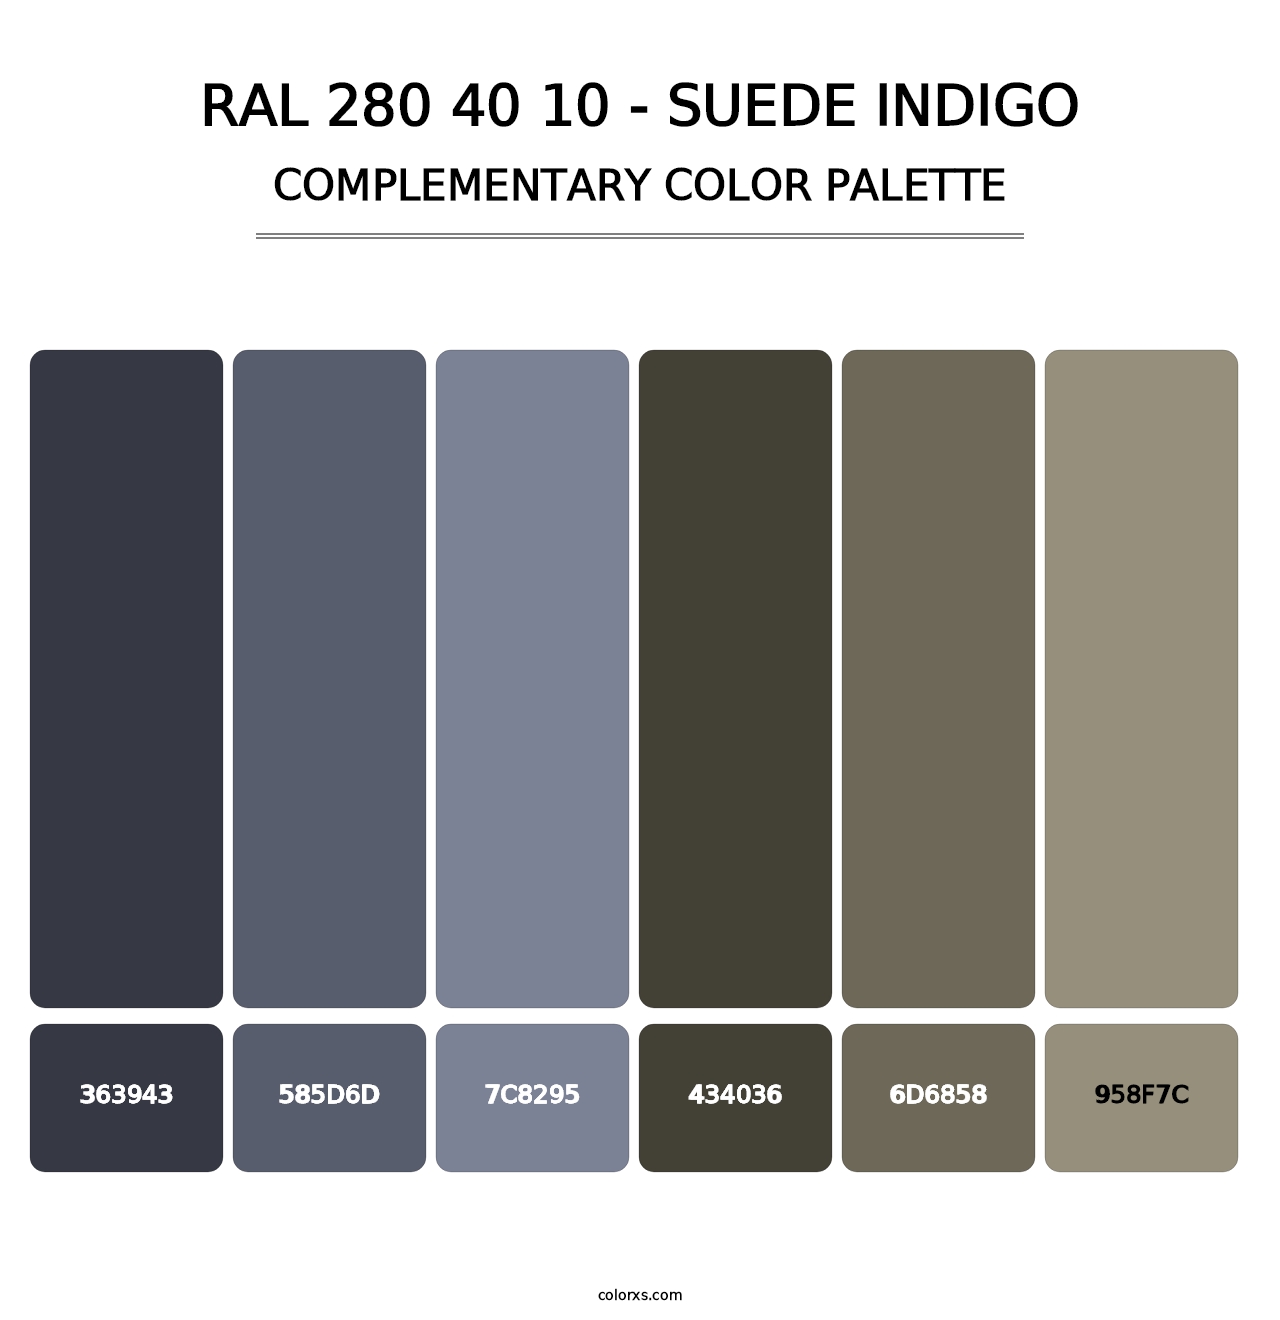 RAL 280 40 10 - Suede Indigo - Complementary Color Palette